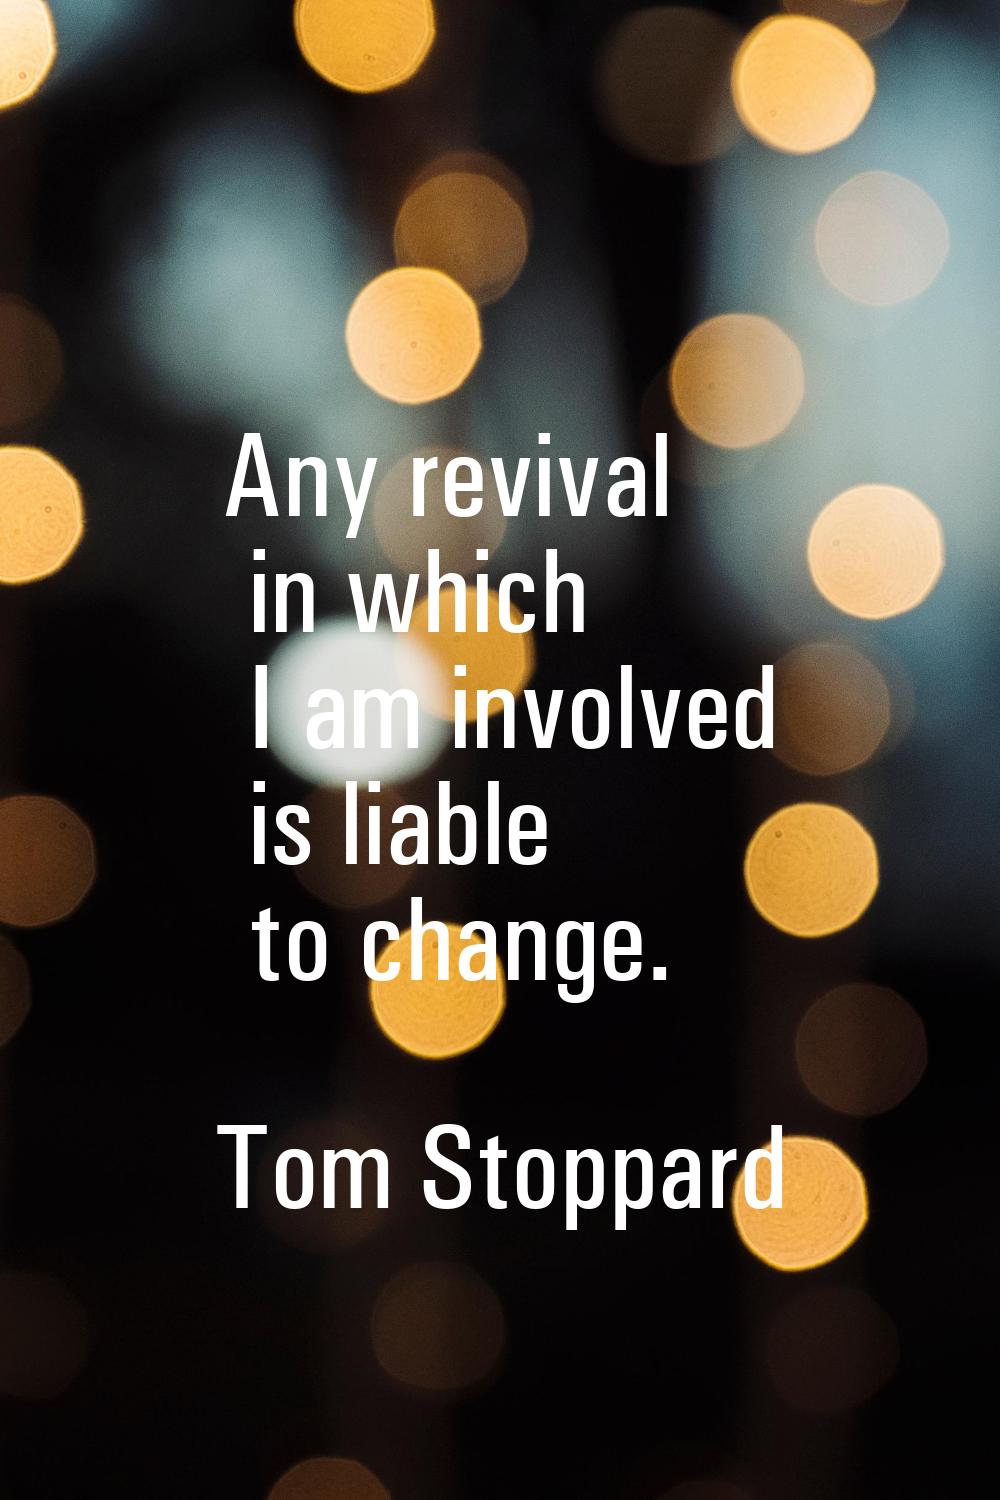 Any revival in which I am involved is liable to change.